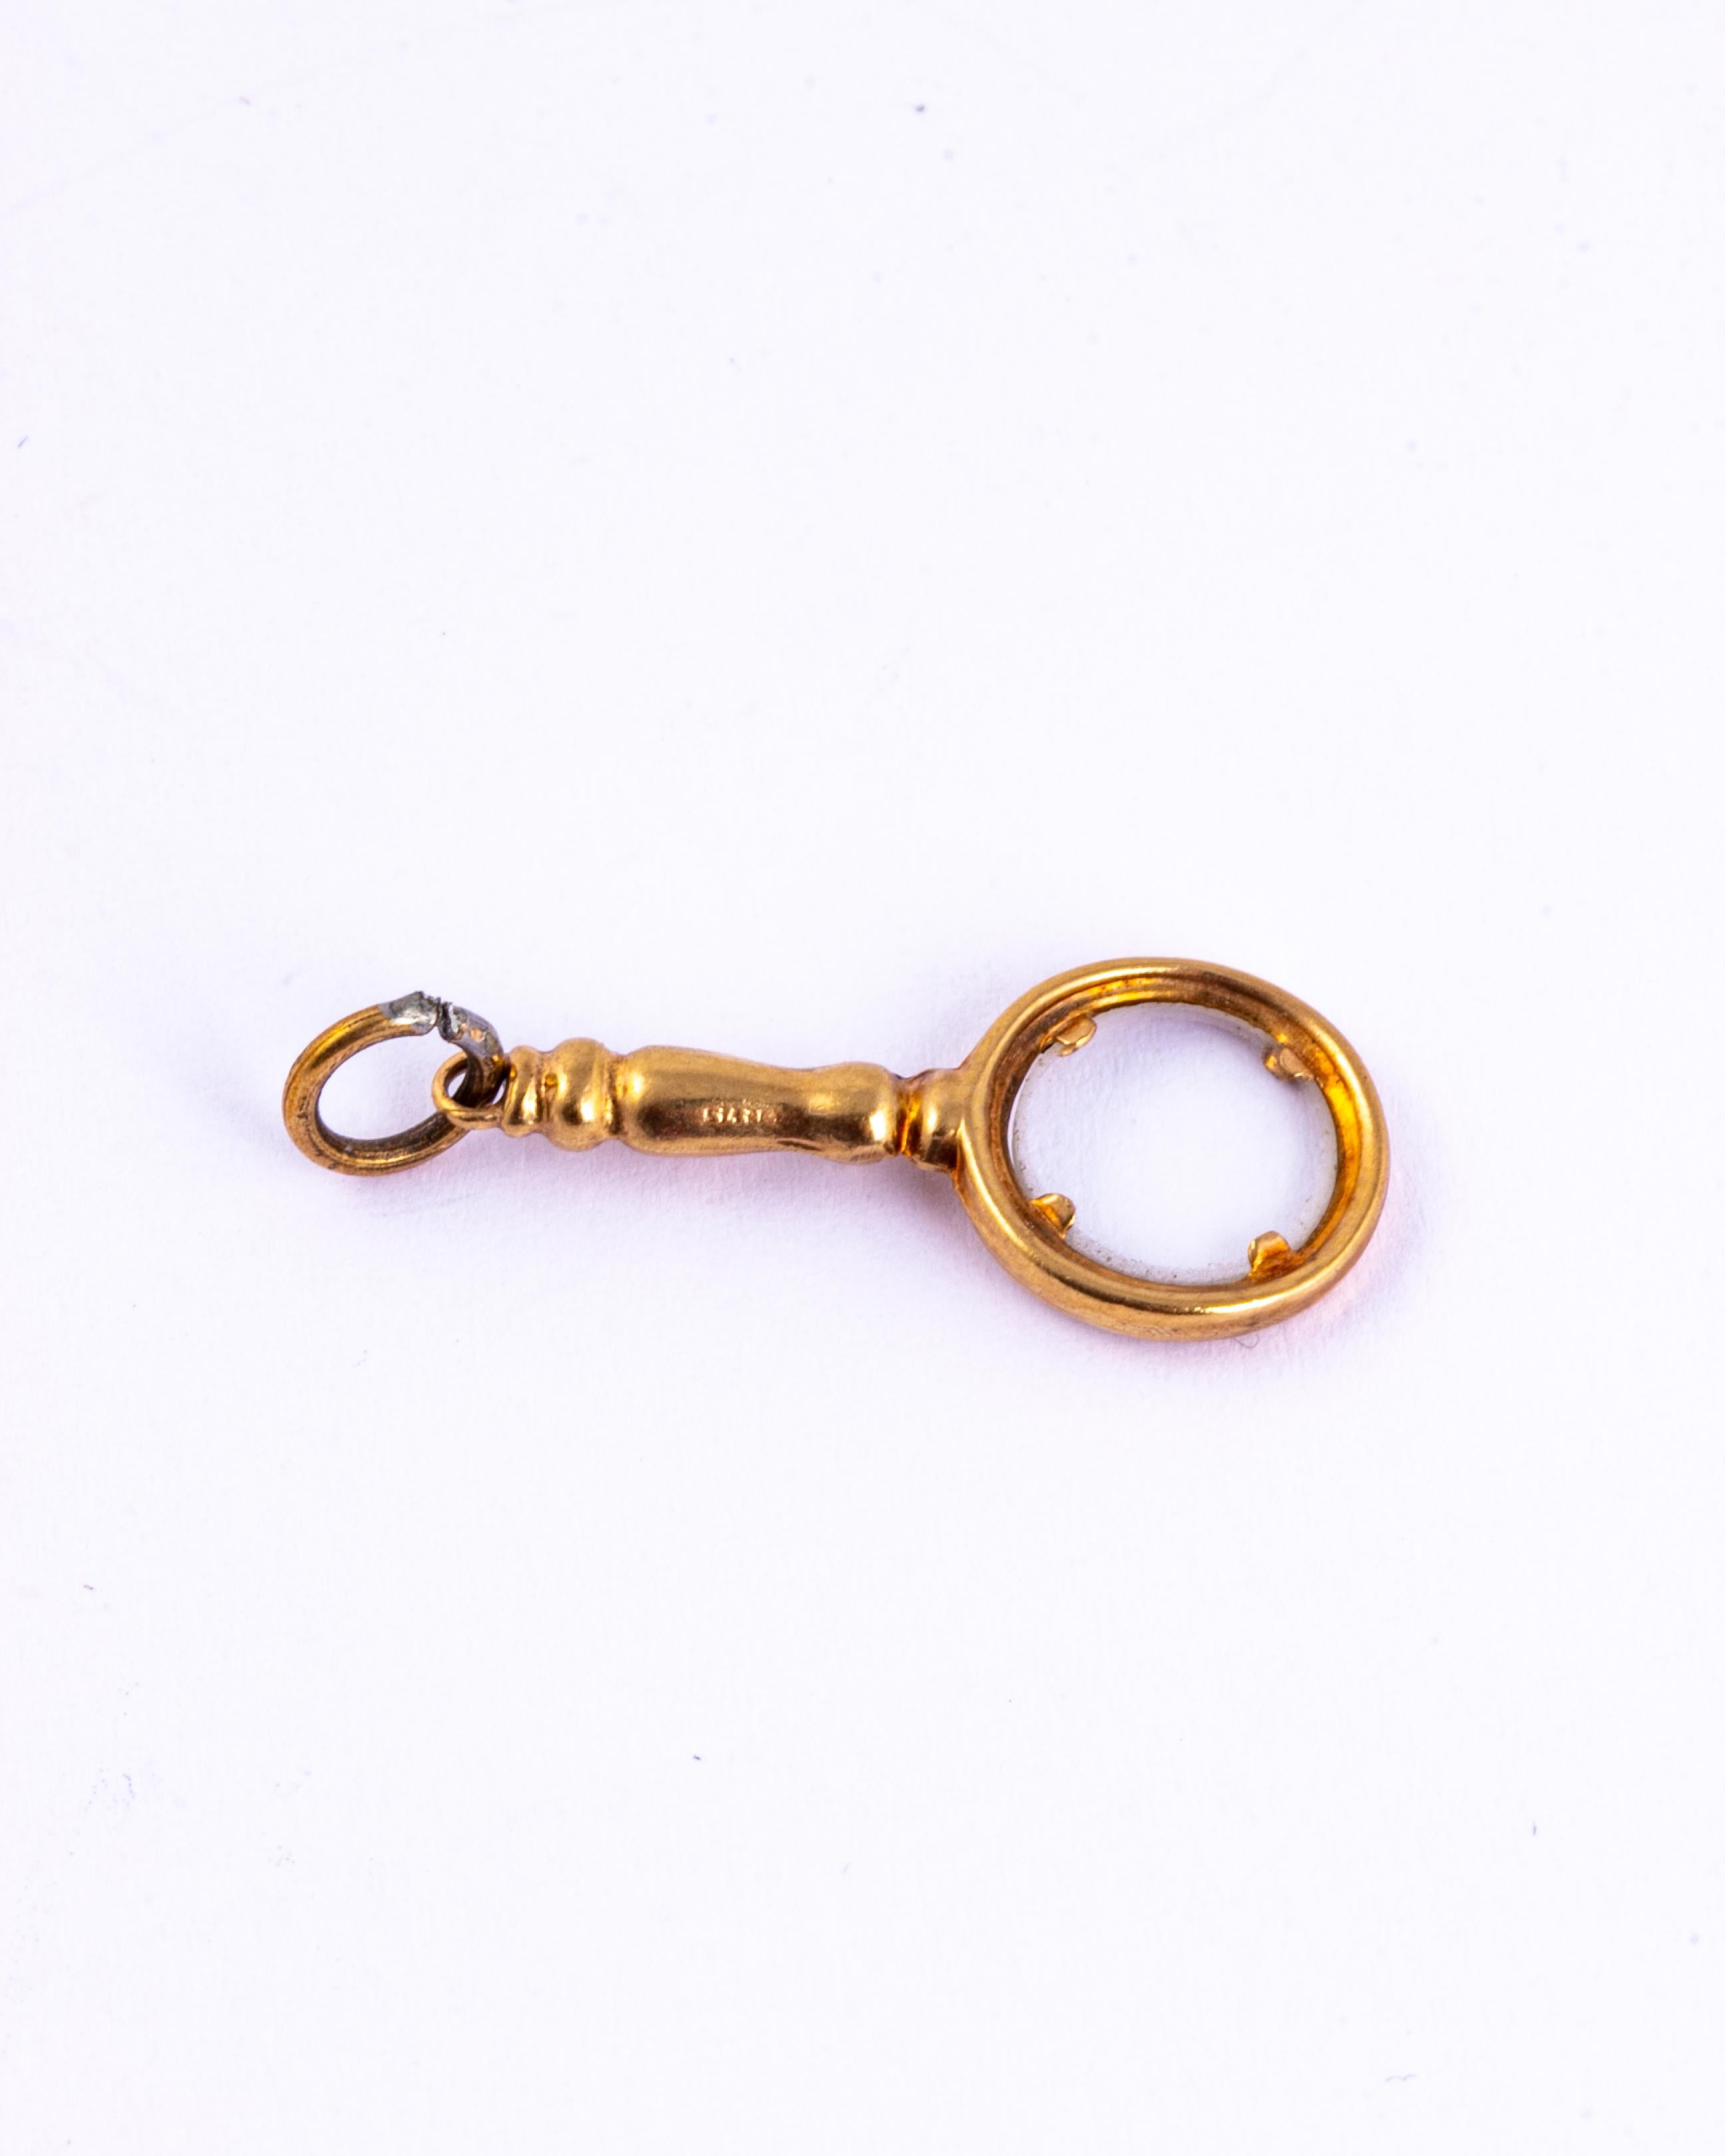 This pendant is a magnifying glass that actually works! It is so delicate and sweet and is modelled in 9ct gold. 

Length Including Loop: 25mm

Weight: 0.62g